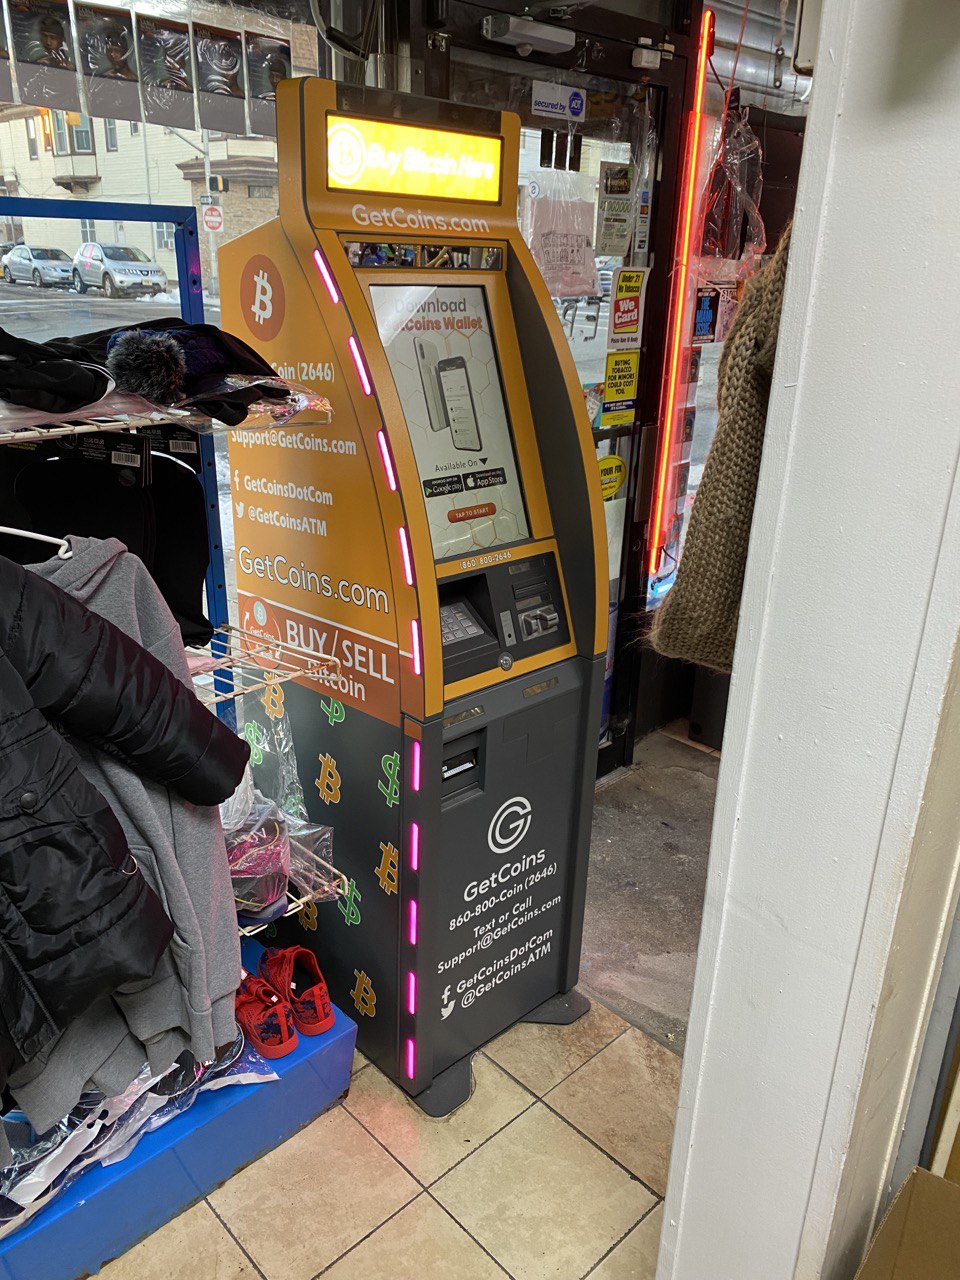 Getcoins - Bitcoin ATM - Inside of Edward Inc. Deli in Bayonne, New Jersey